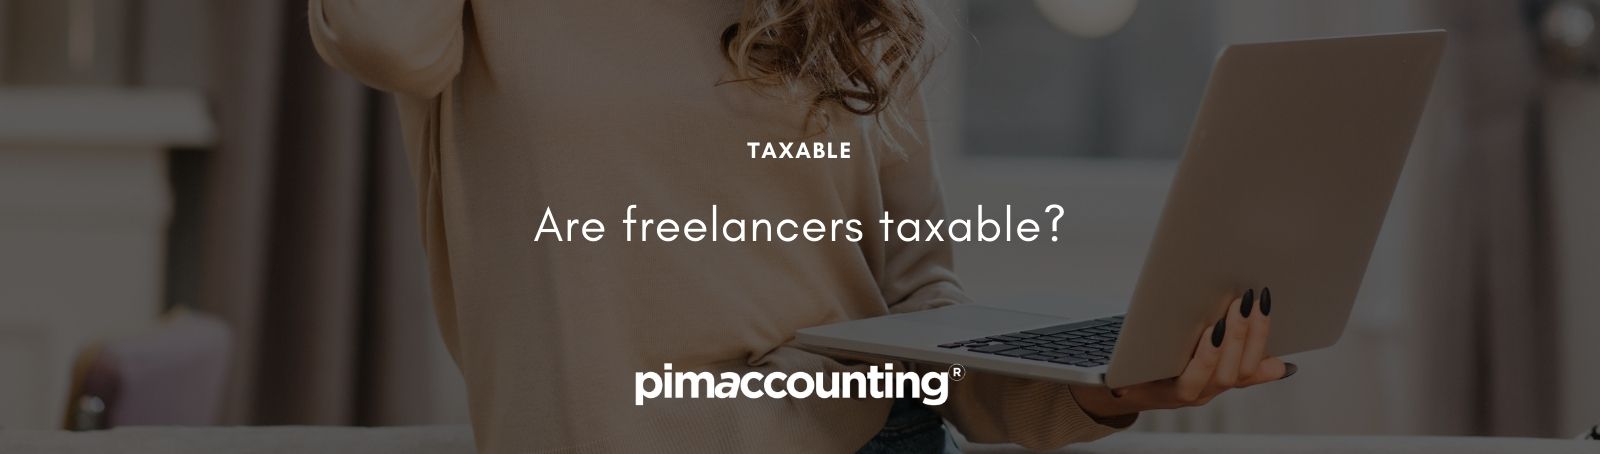 Are freelancers taxable?